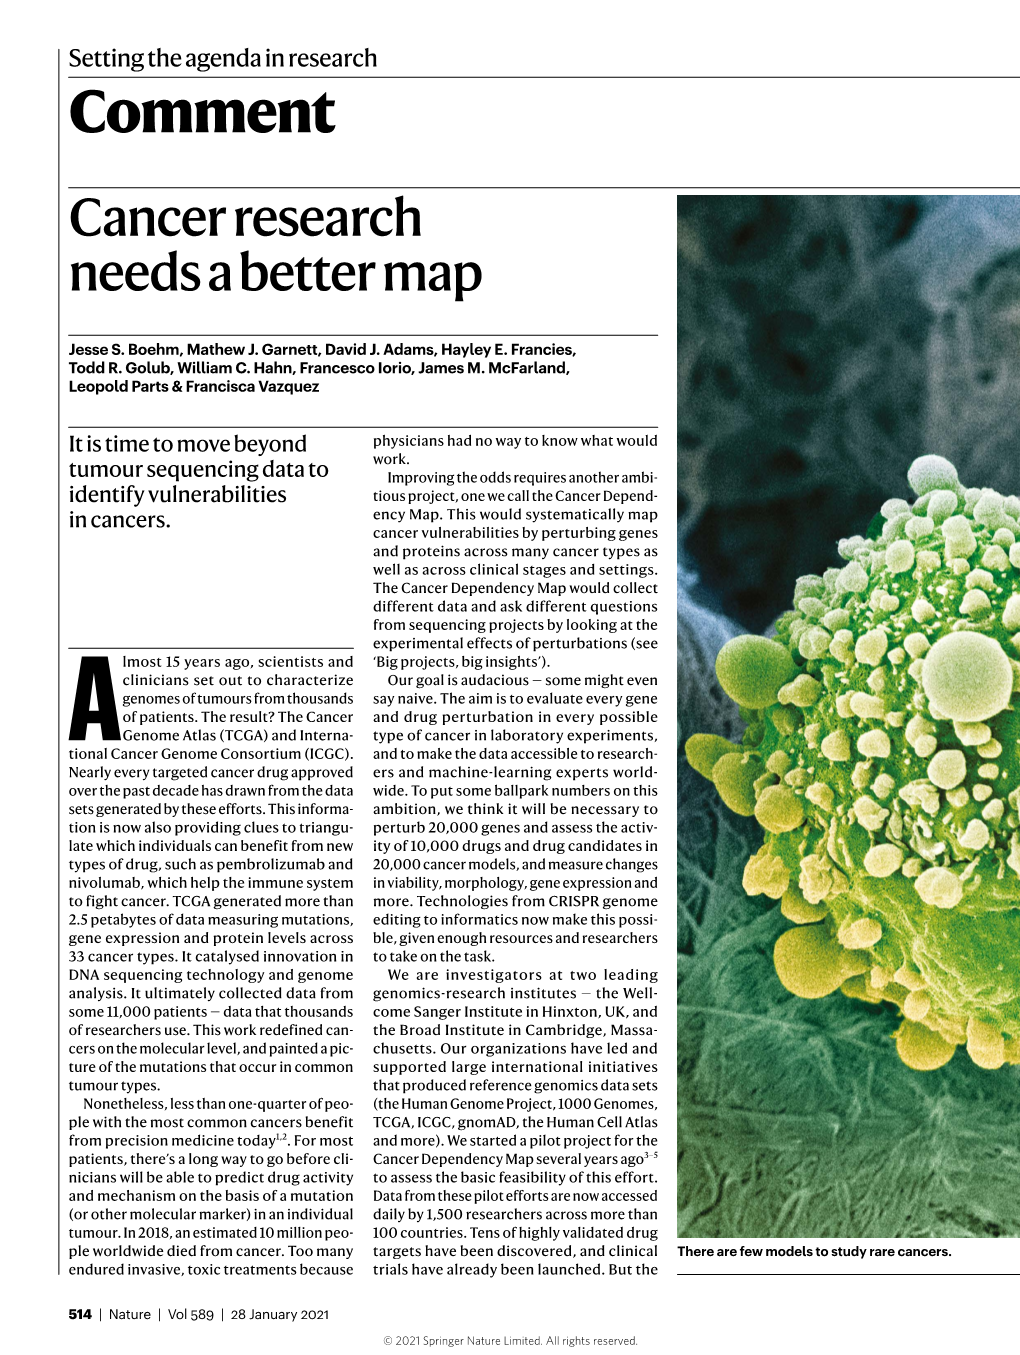 Comment Cancer Research Needs a Better Map